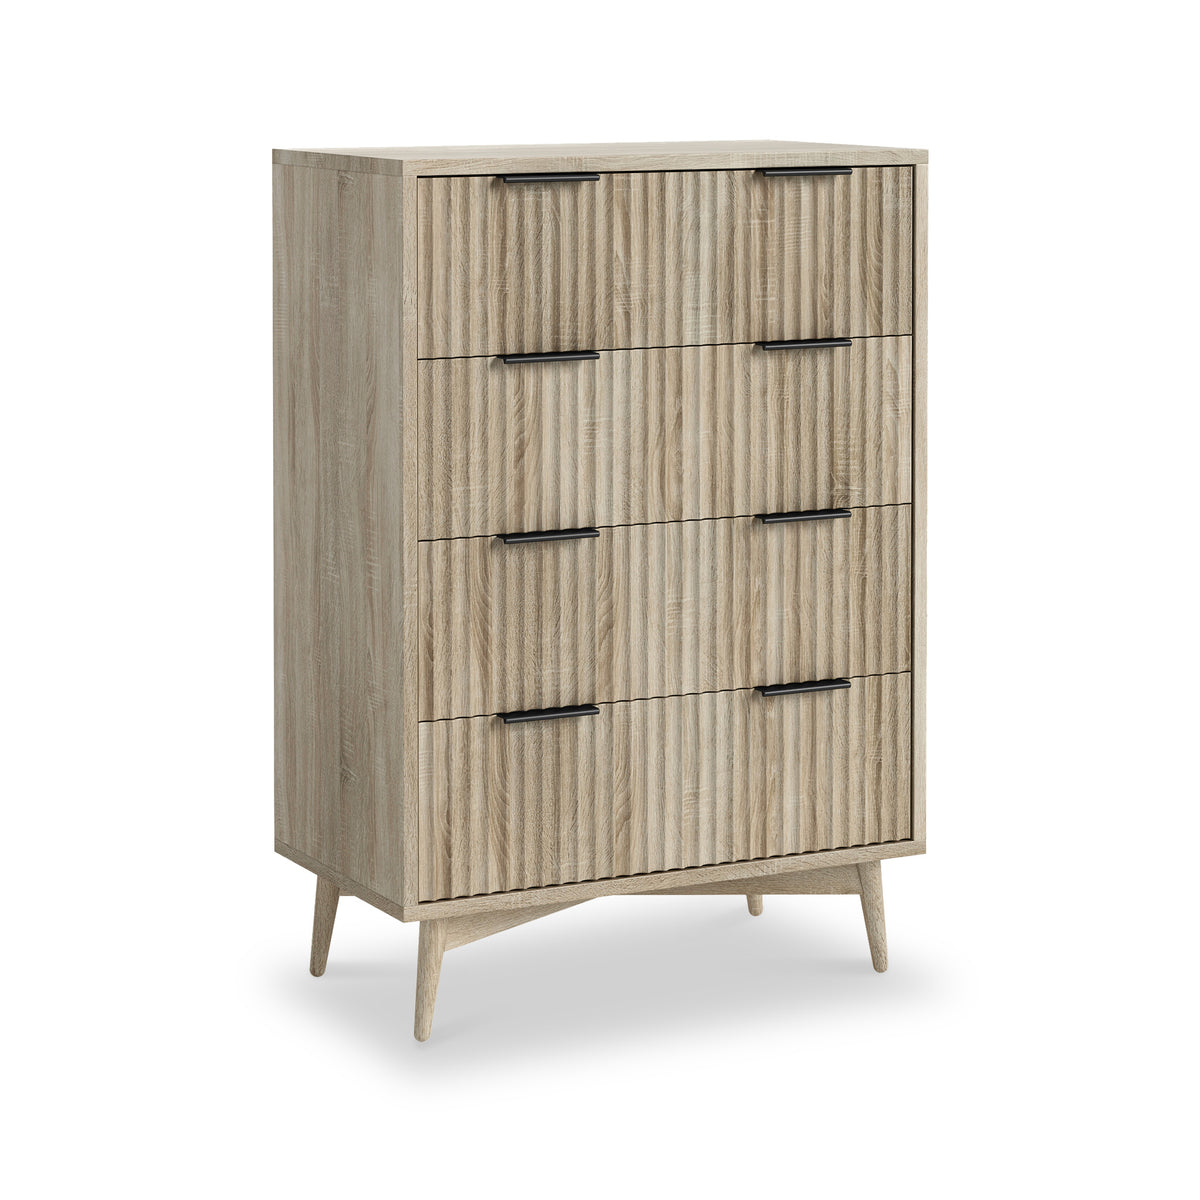 Jakob Oak 4 Drawer Tall Grooved Chest from Roseland furniture